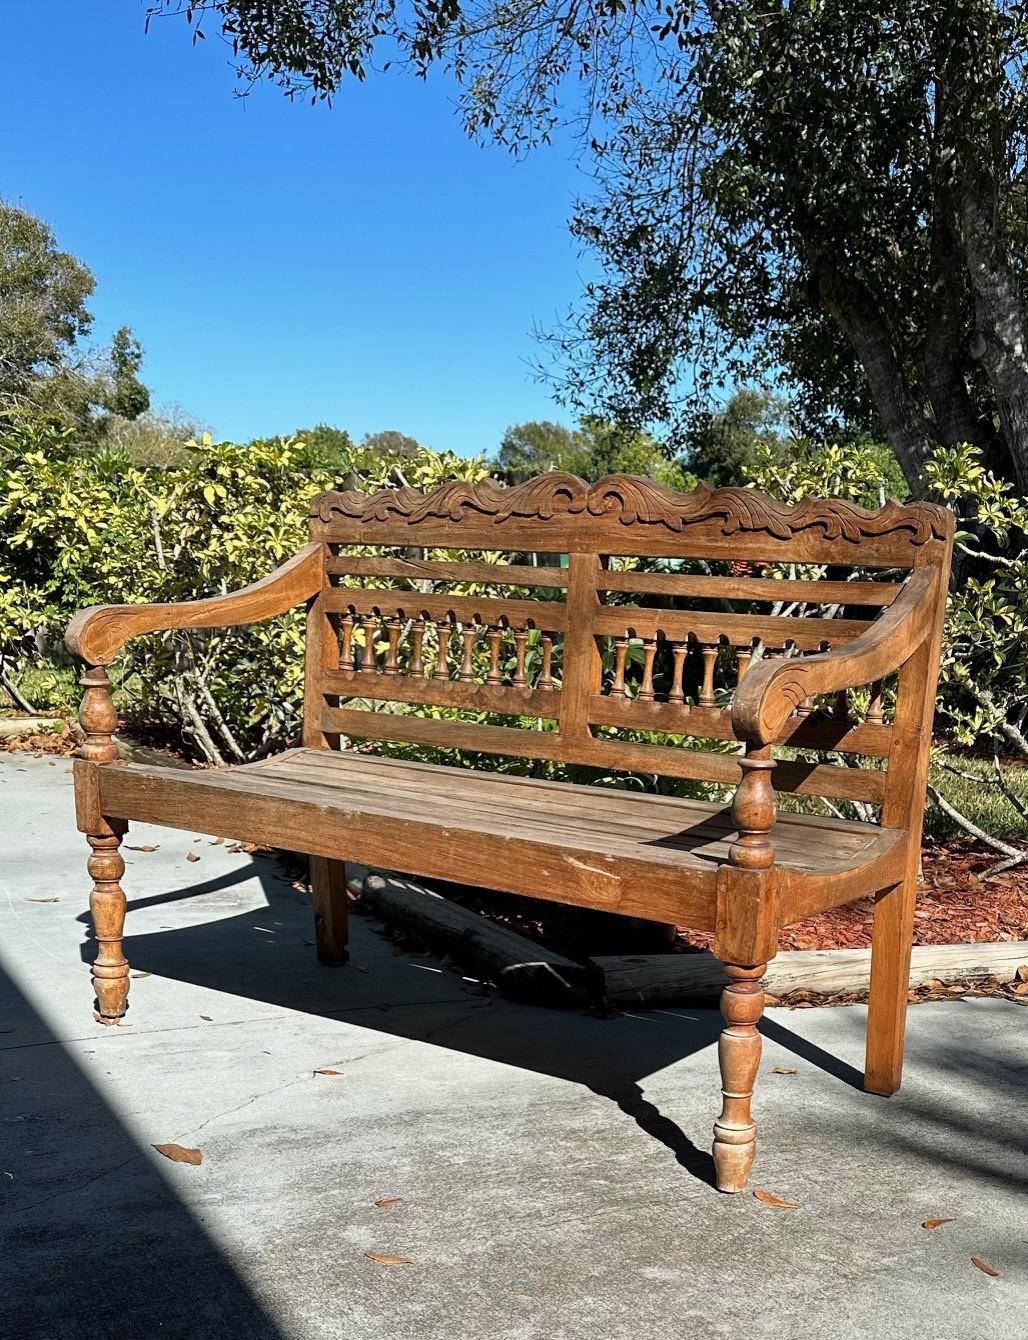 Hand Carved Indonesian 1980s Colonial Teak Wooden Garden Bench

Solid wood bench is handcrafted by skilled craftsmen with experience in working with teak wood. The seat is slatted and the back is carved. The vintage bench stands on turned front legs